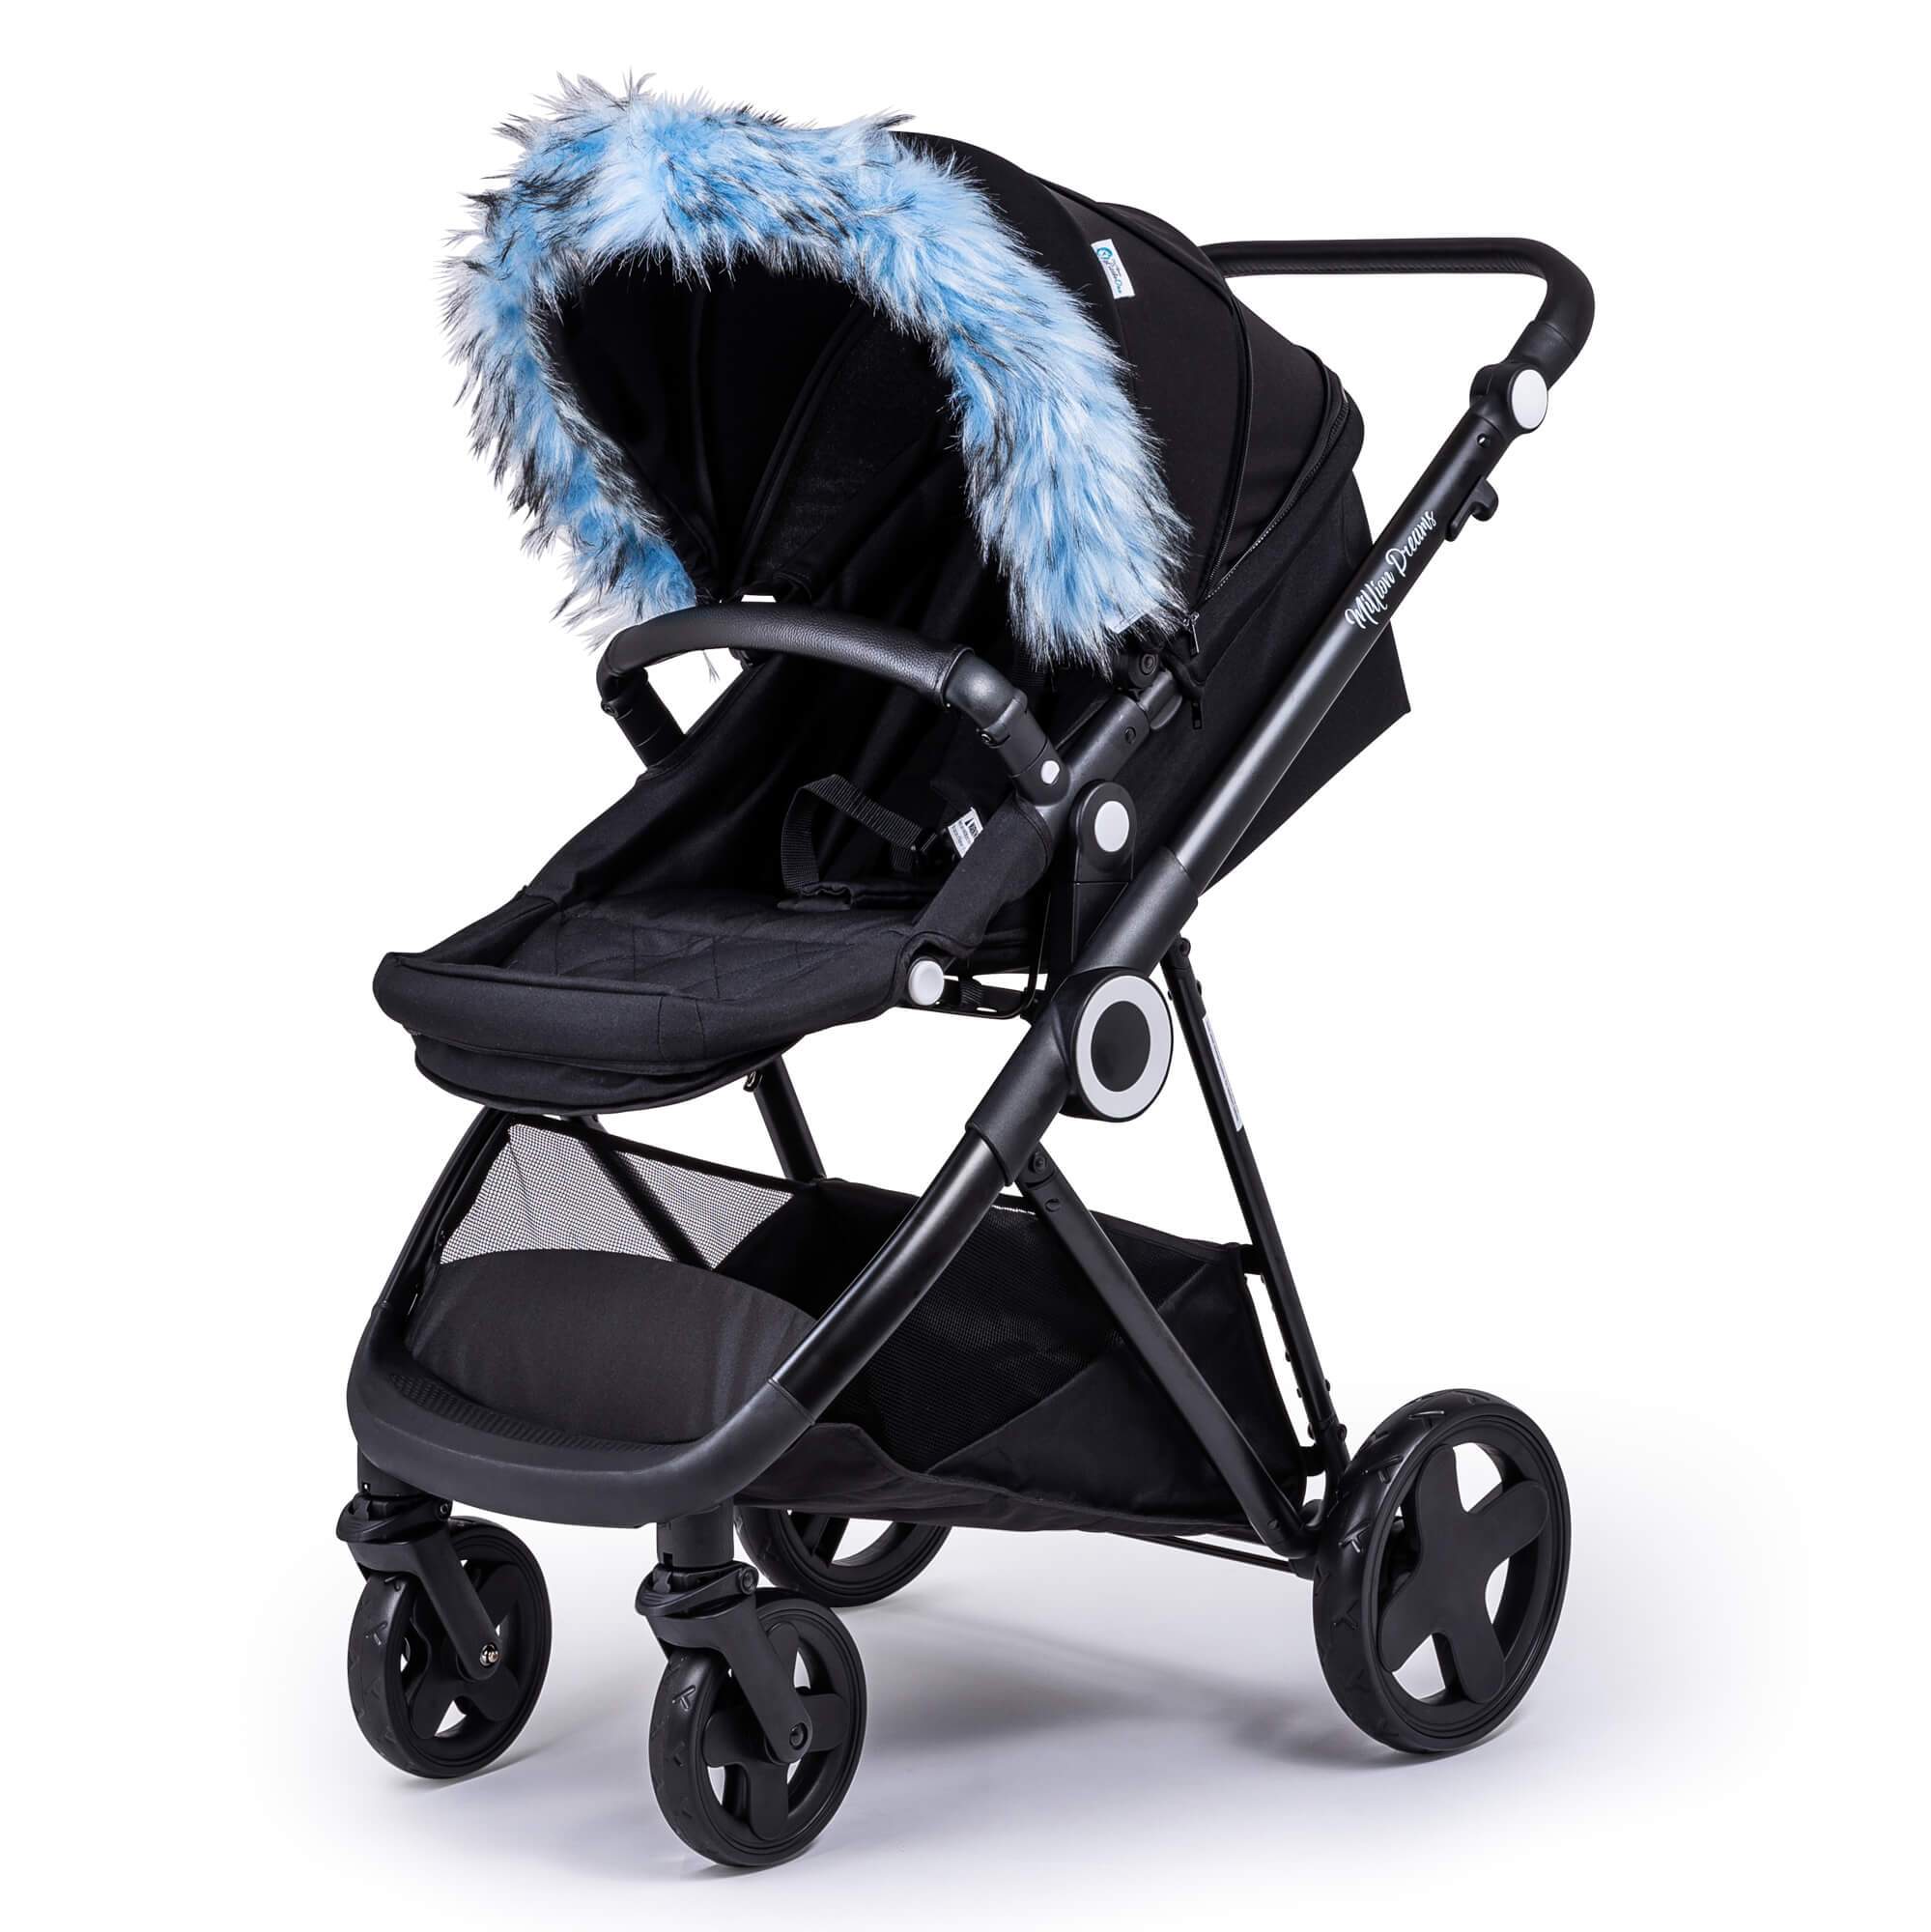 Pram Fur Hood Trim Attachment for Pushchair Compatible with Brevi - Light Blue / Fits All Models | For Your Little One